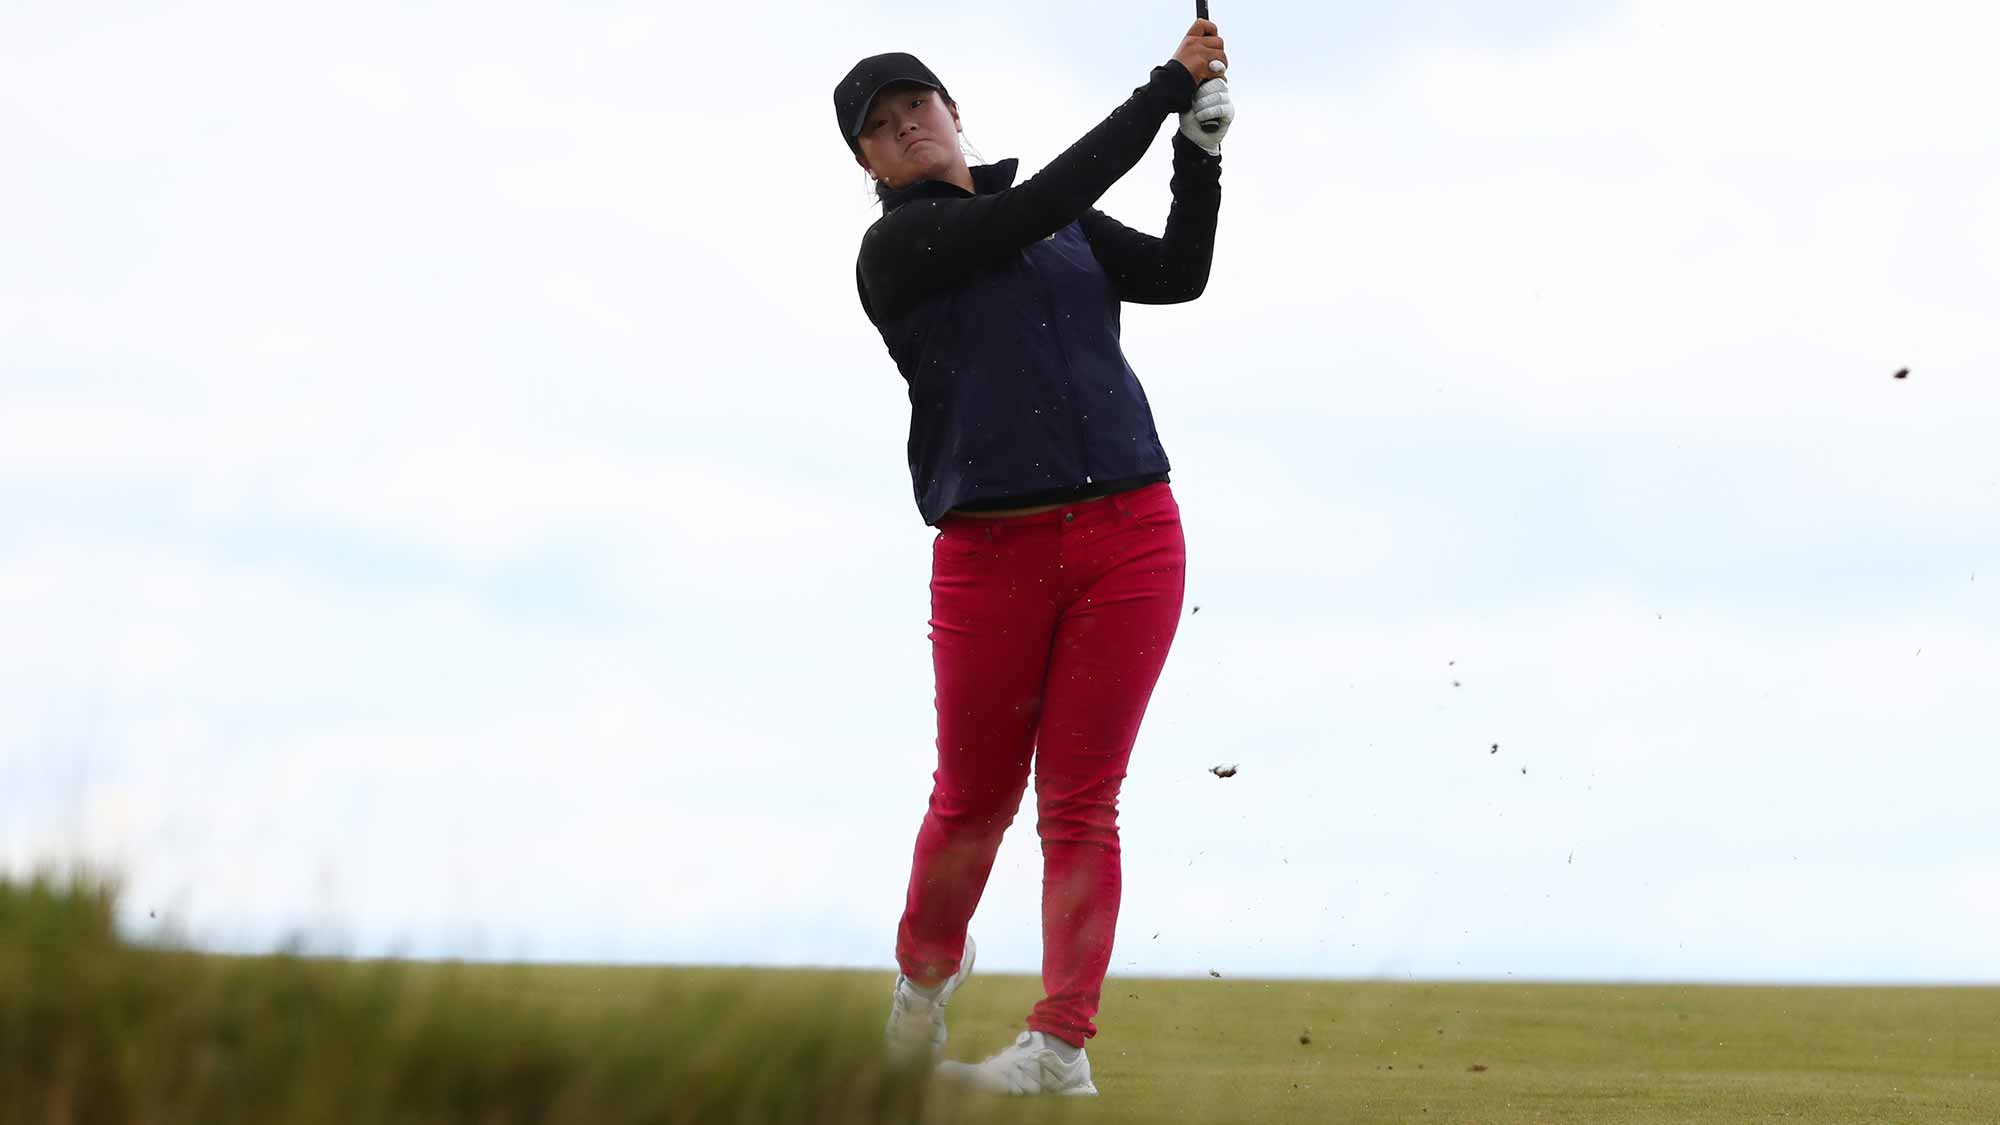 Angel Yin of the United States hits her second shot on the 4th hole during the third round of the Ricoh Women's British Open at Kingsbarns Golf Links